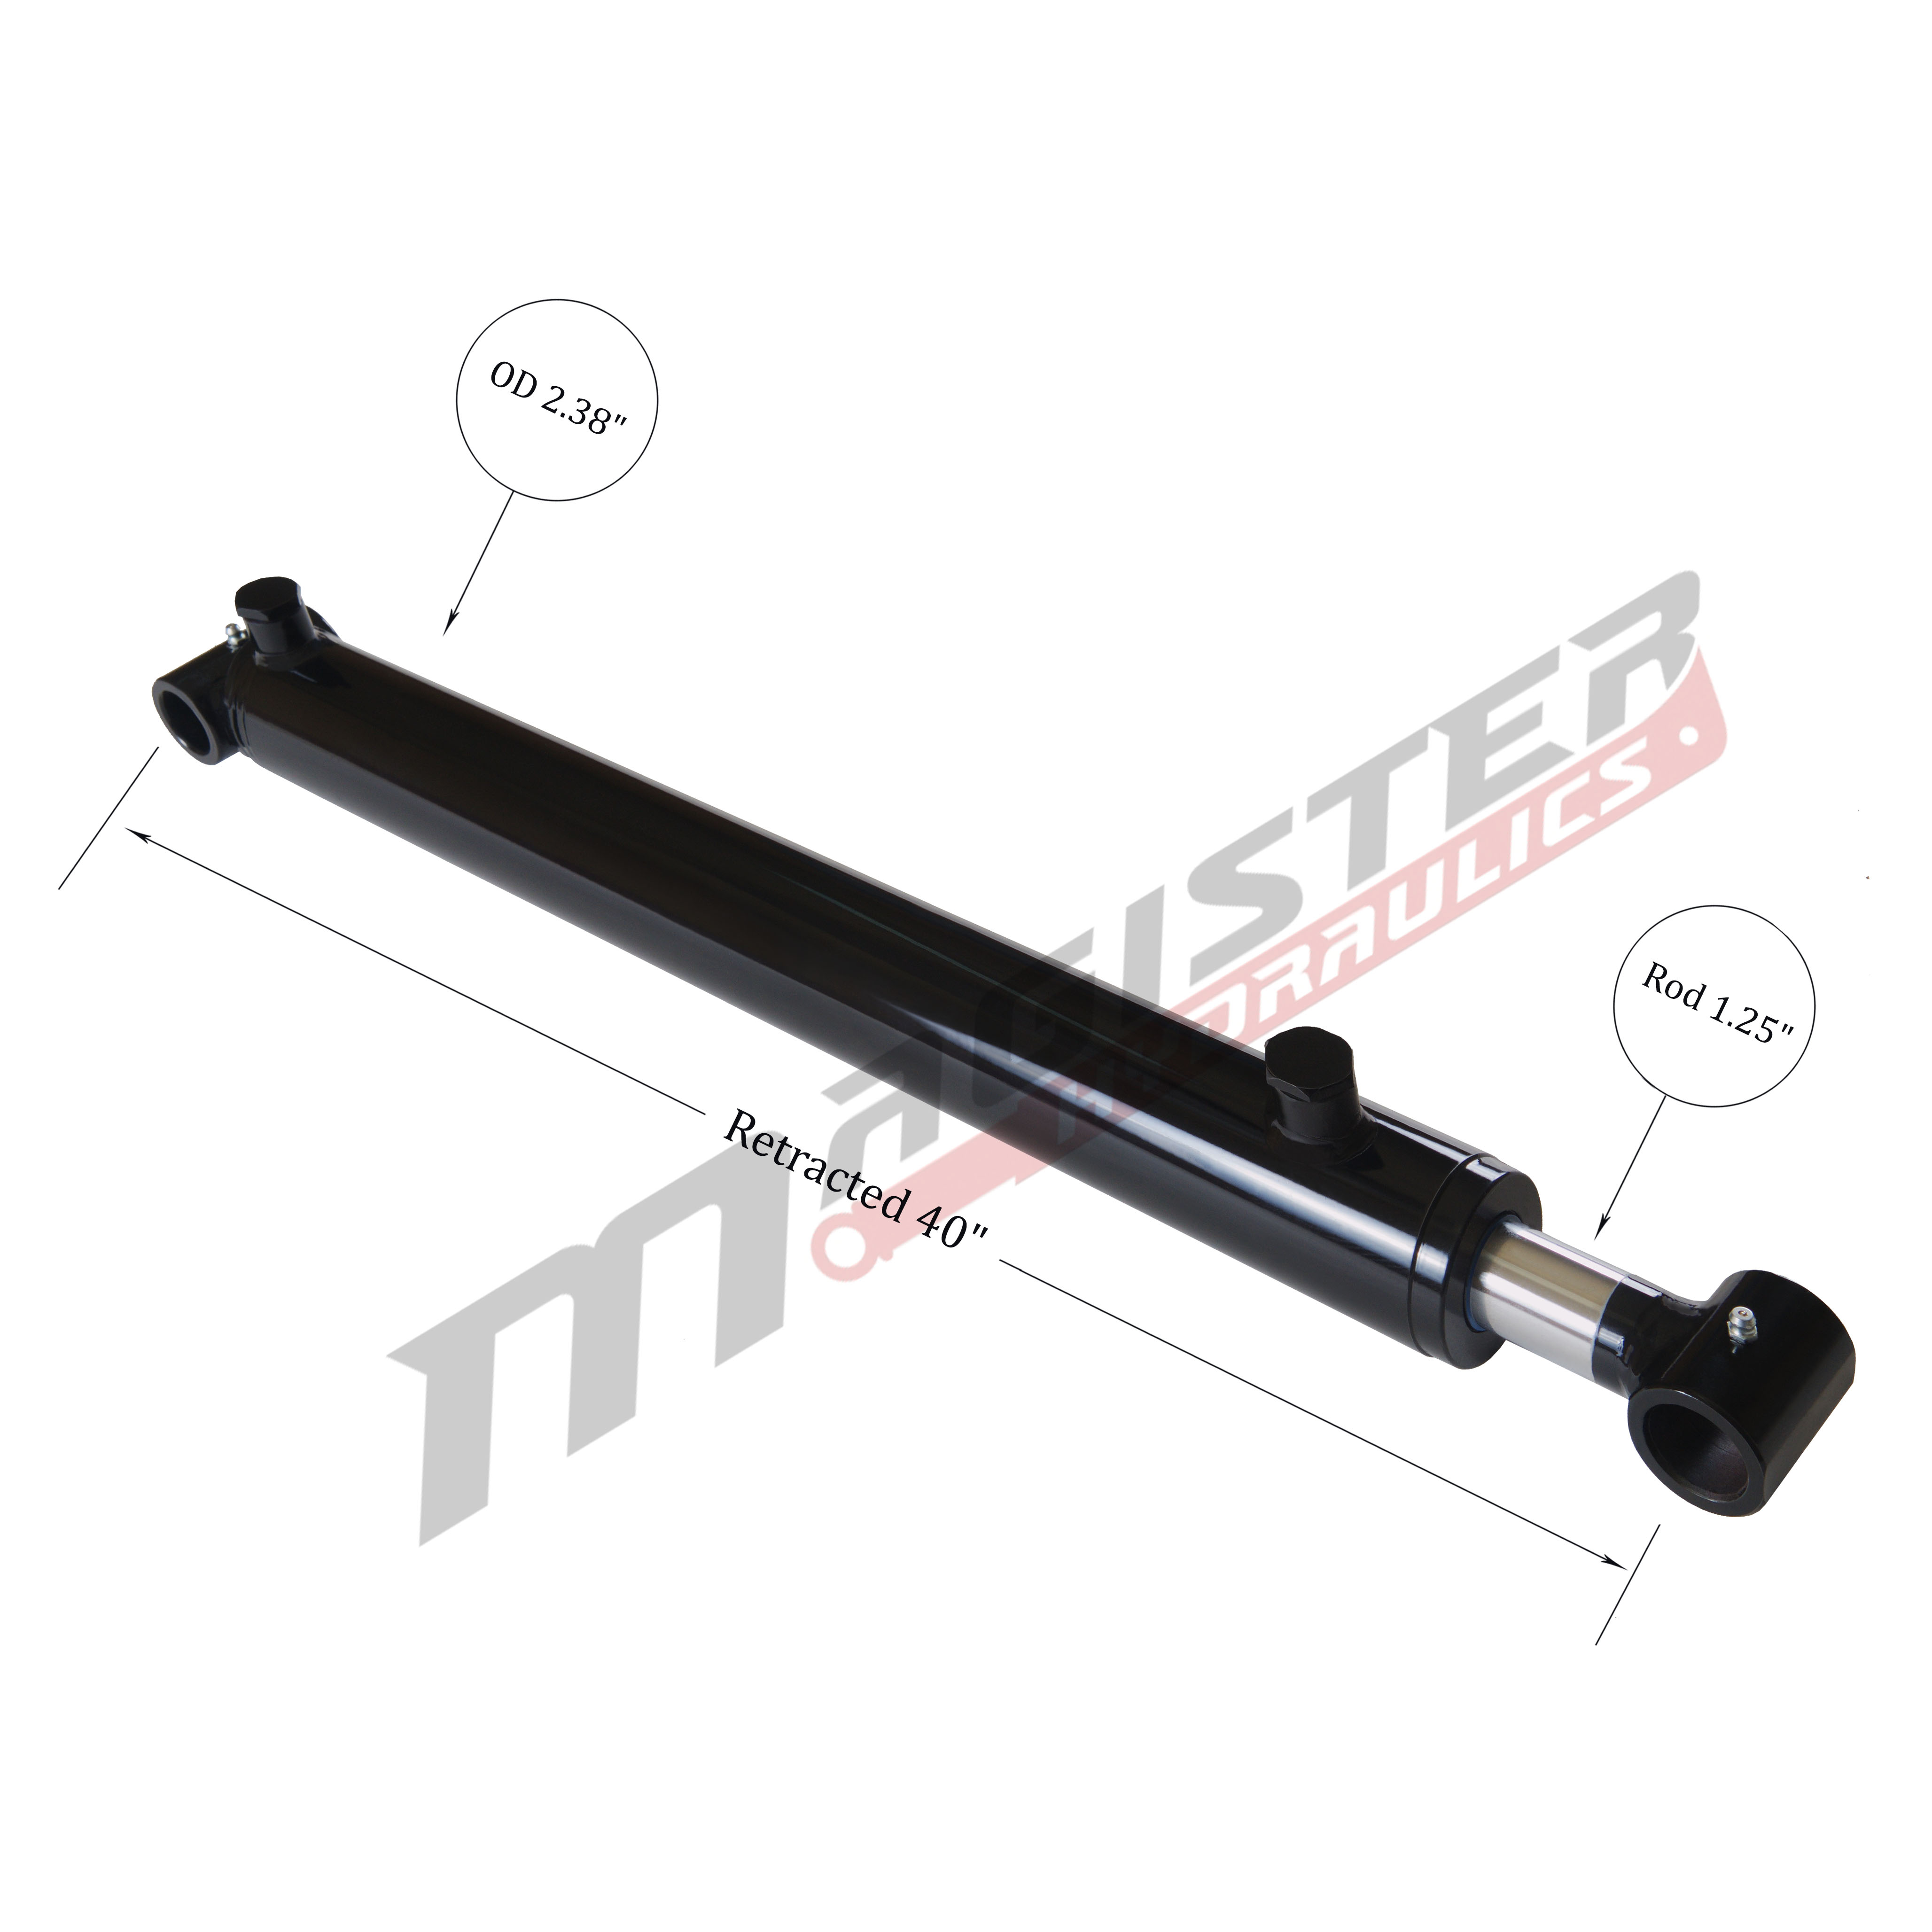 2 bore x 32 stroke hydraulic cylinder, welded cross tube double acting cylinder | Magister Hydraulics